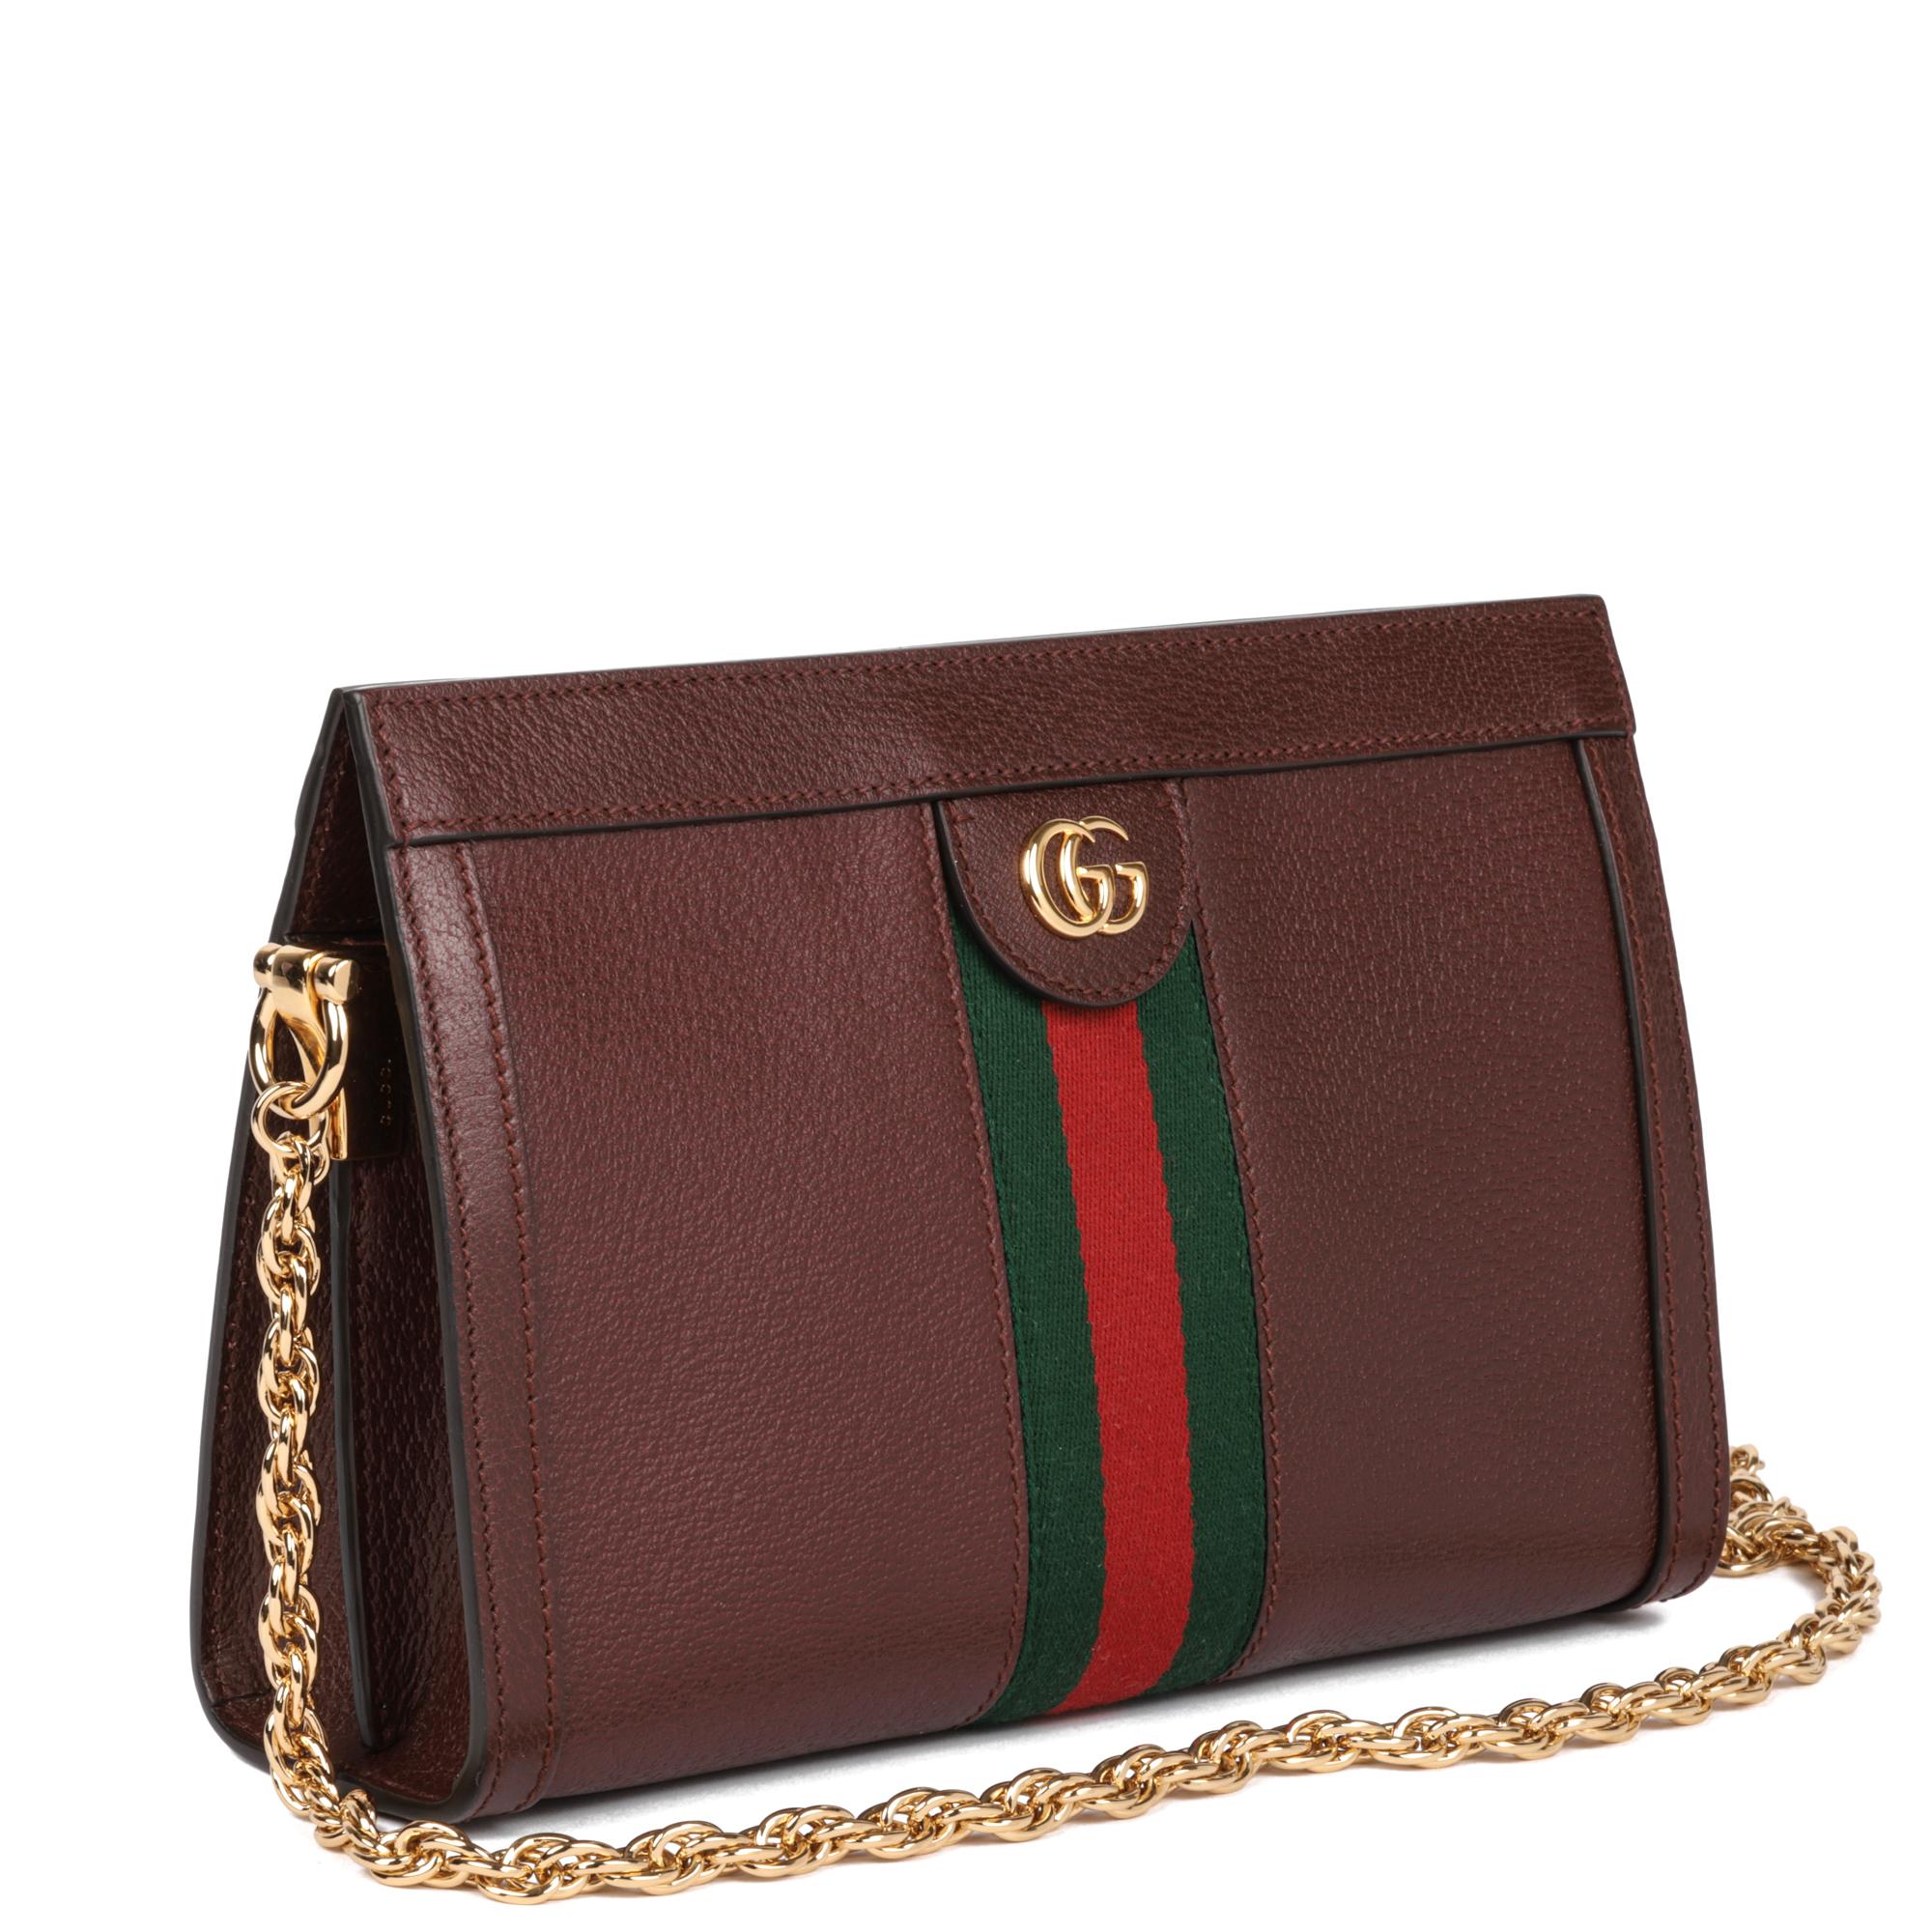 GUCCI
Bordeaux Calfskin Leather & GG Web Small Ophidia Shoulder Bag

Xupes Reference: HB5096
Serial Number: 503377 520981
Age (Circa): 2019
Accompanied By: Gucci Dust Bag, Care Booklet
Authenticity Details: Date Stamp (Made in Italy)
Gender: